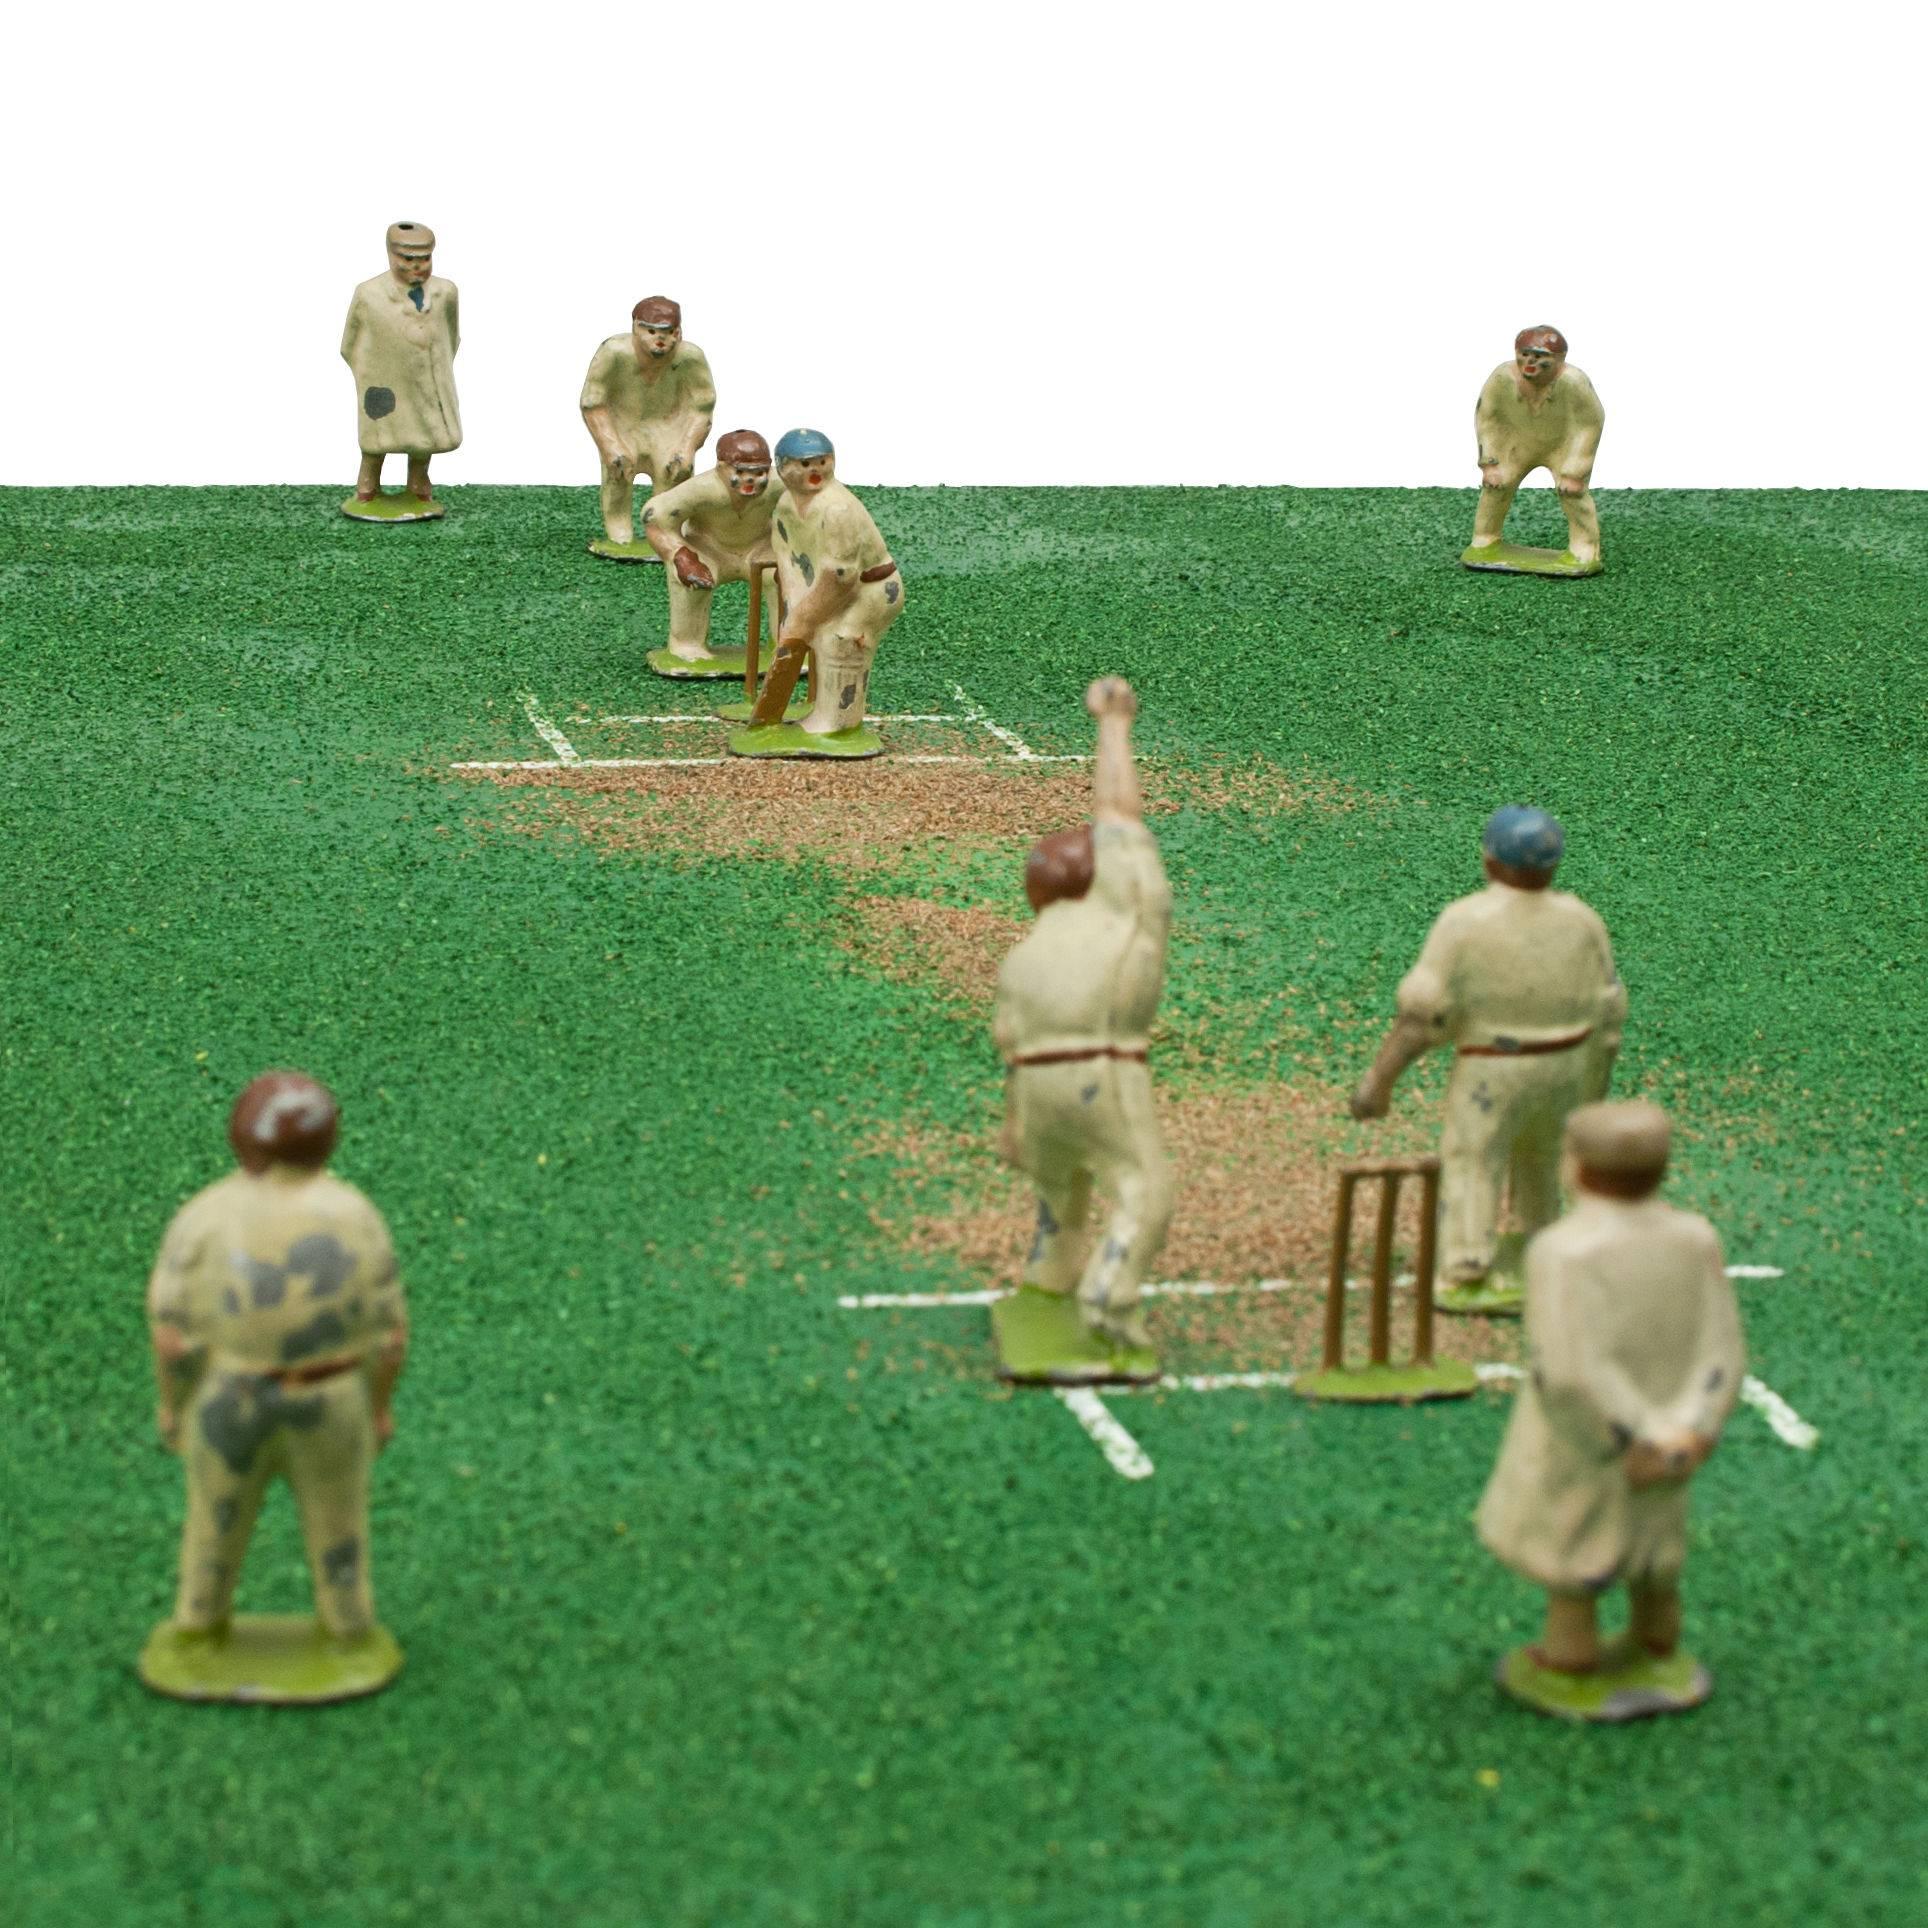 Lead Cricket Toy Figures. 
An unusual and very rare set of lead toy figures of cricket players. The figures have been set out as a cricket match and comprise of two Batsmen, two Umpires, Bowler, Wicketkeeper, three Slips, six Outfielders and two